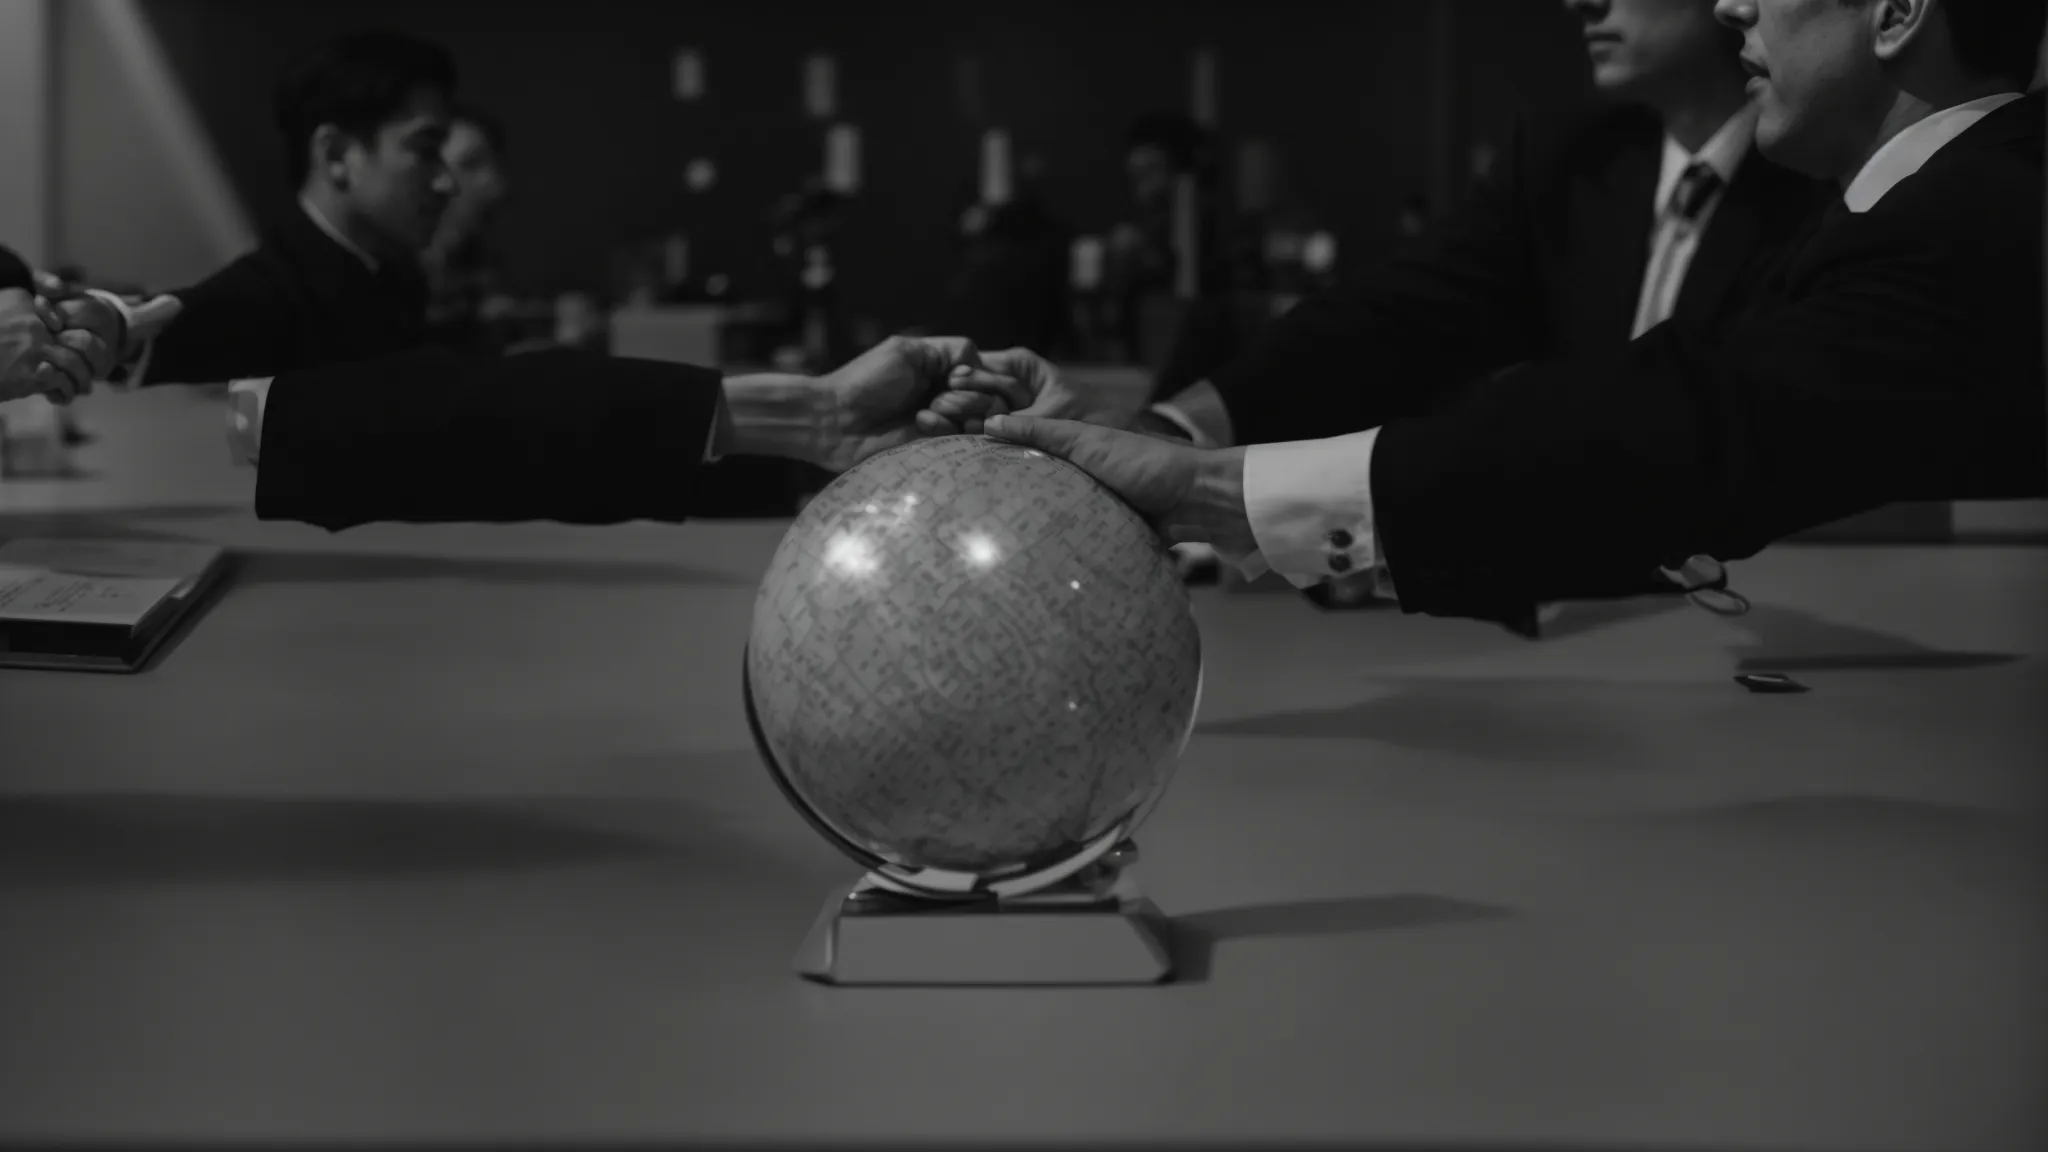 two professionals shake hands across a table with a globe in the background, symbolizing international trade agreements.